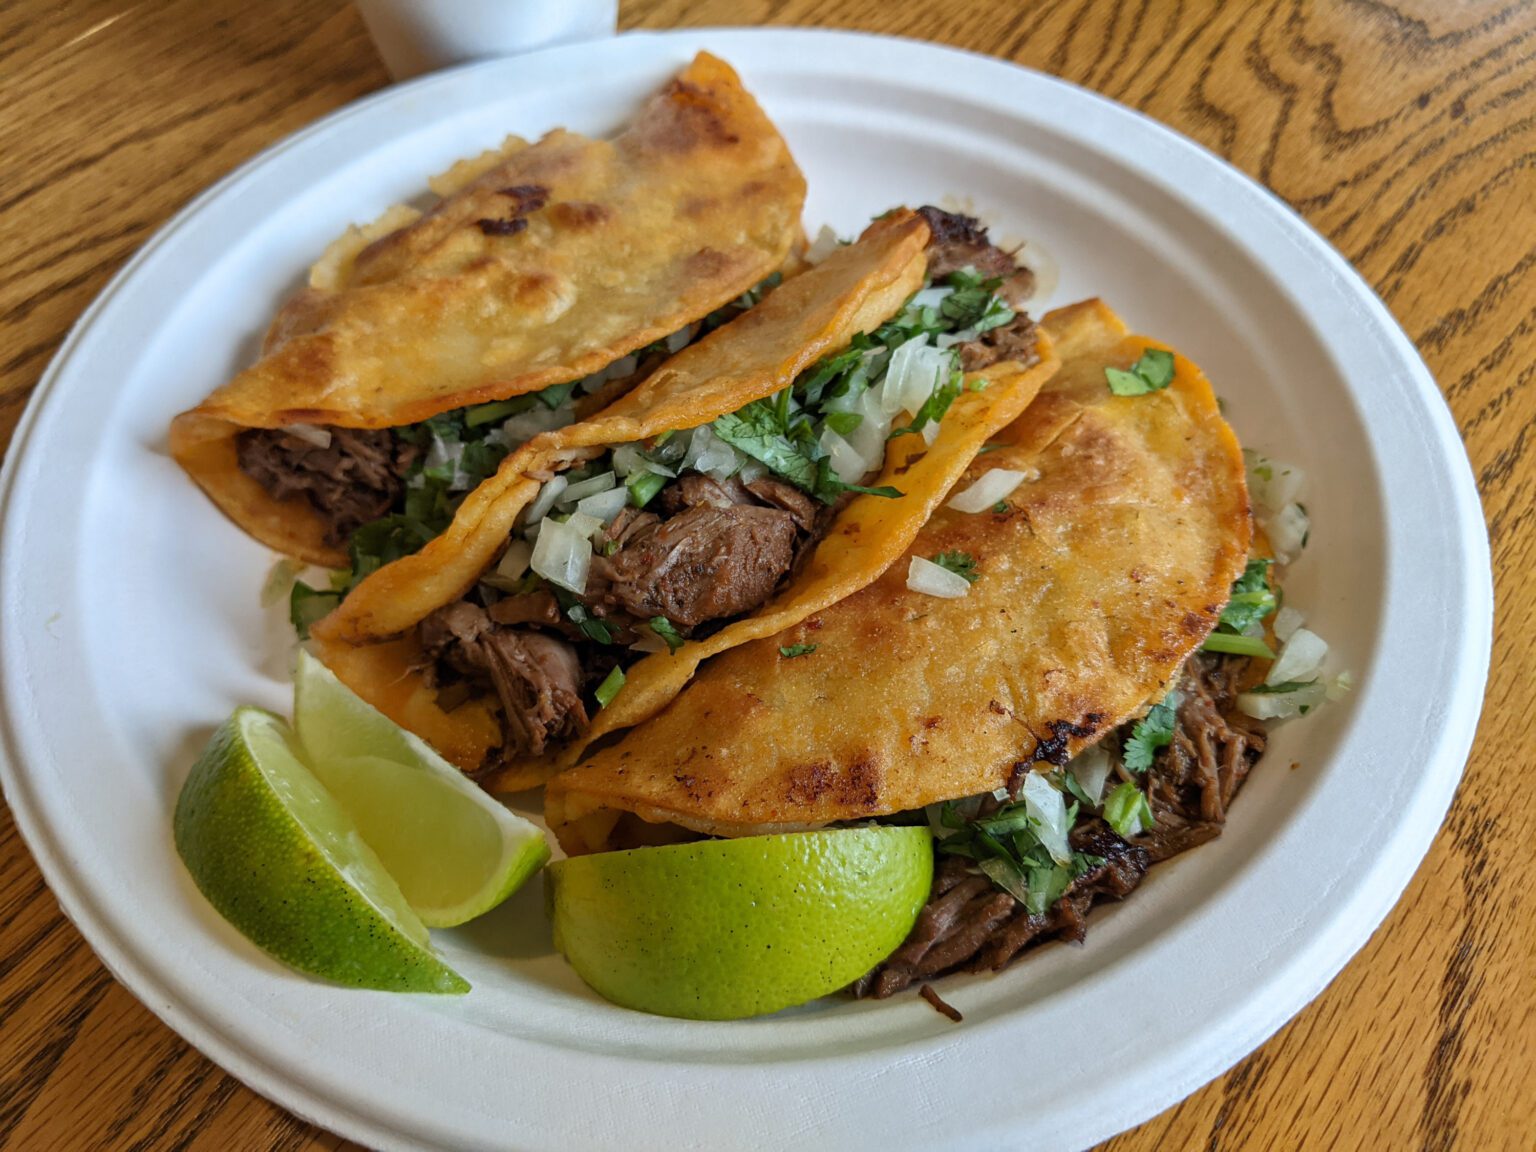 Birria tacos at the Antojos Locos food truck in the parking lot of Burlington Coat Factory are a specialty. Richly seasoned braised beef is tucked inside tortillas and griddle-fried